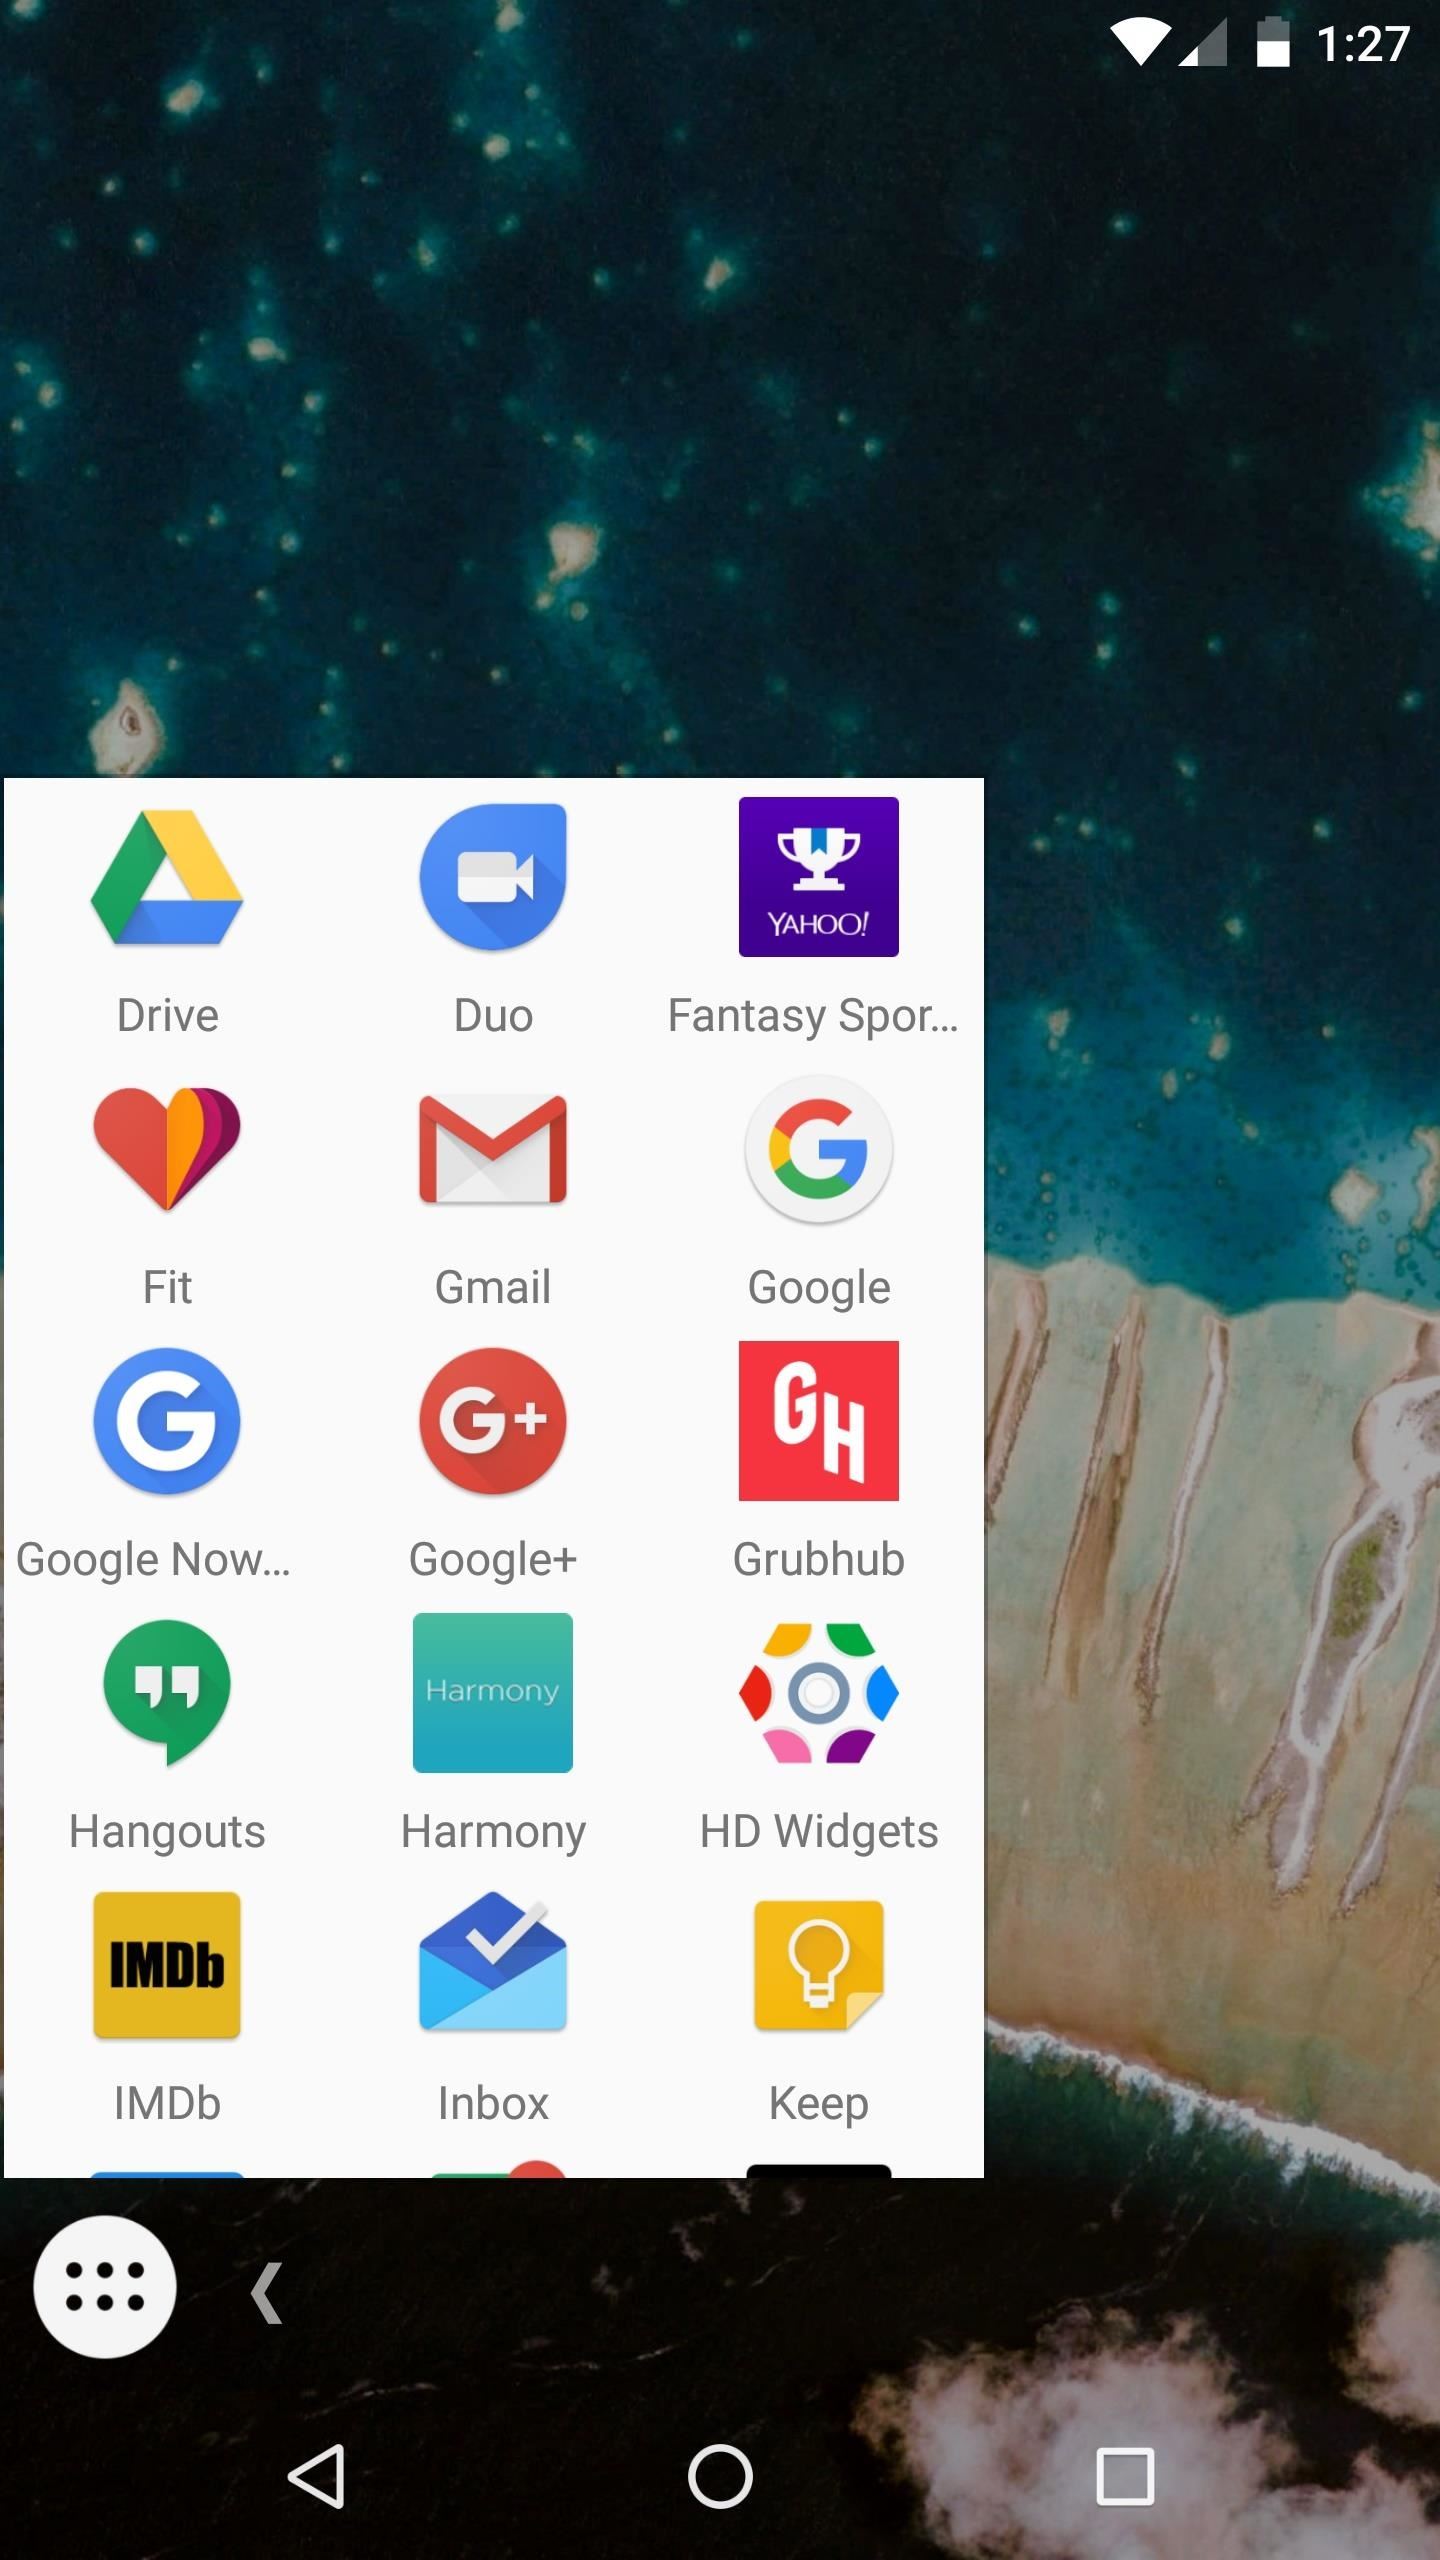 There's a Hidden Feature in Nougat That Gives Your Android Phone or Tablet a Desktop-Like Experience